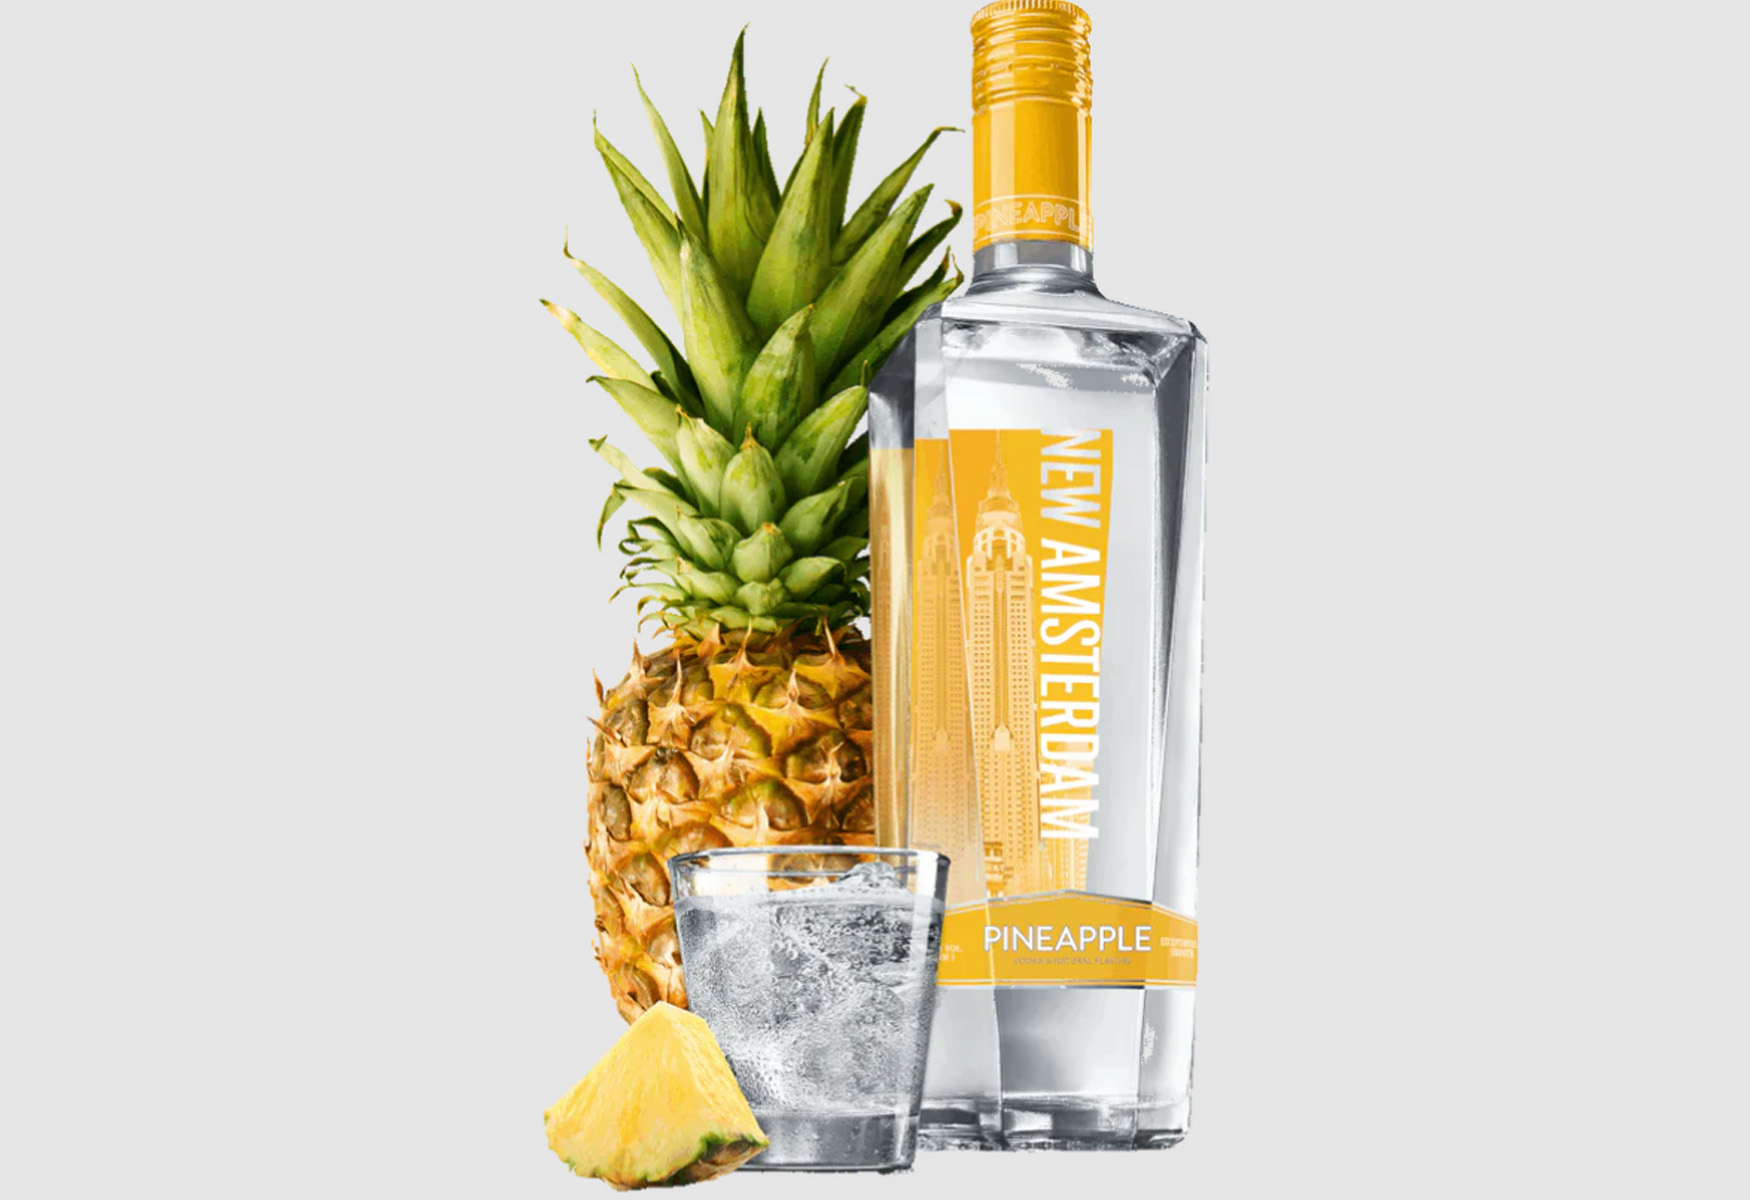 18-new-amsterdam-pineapple-vodka-nutrition-facts